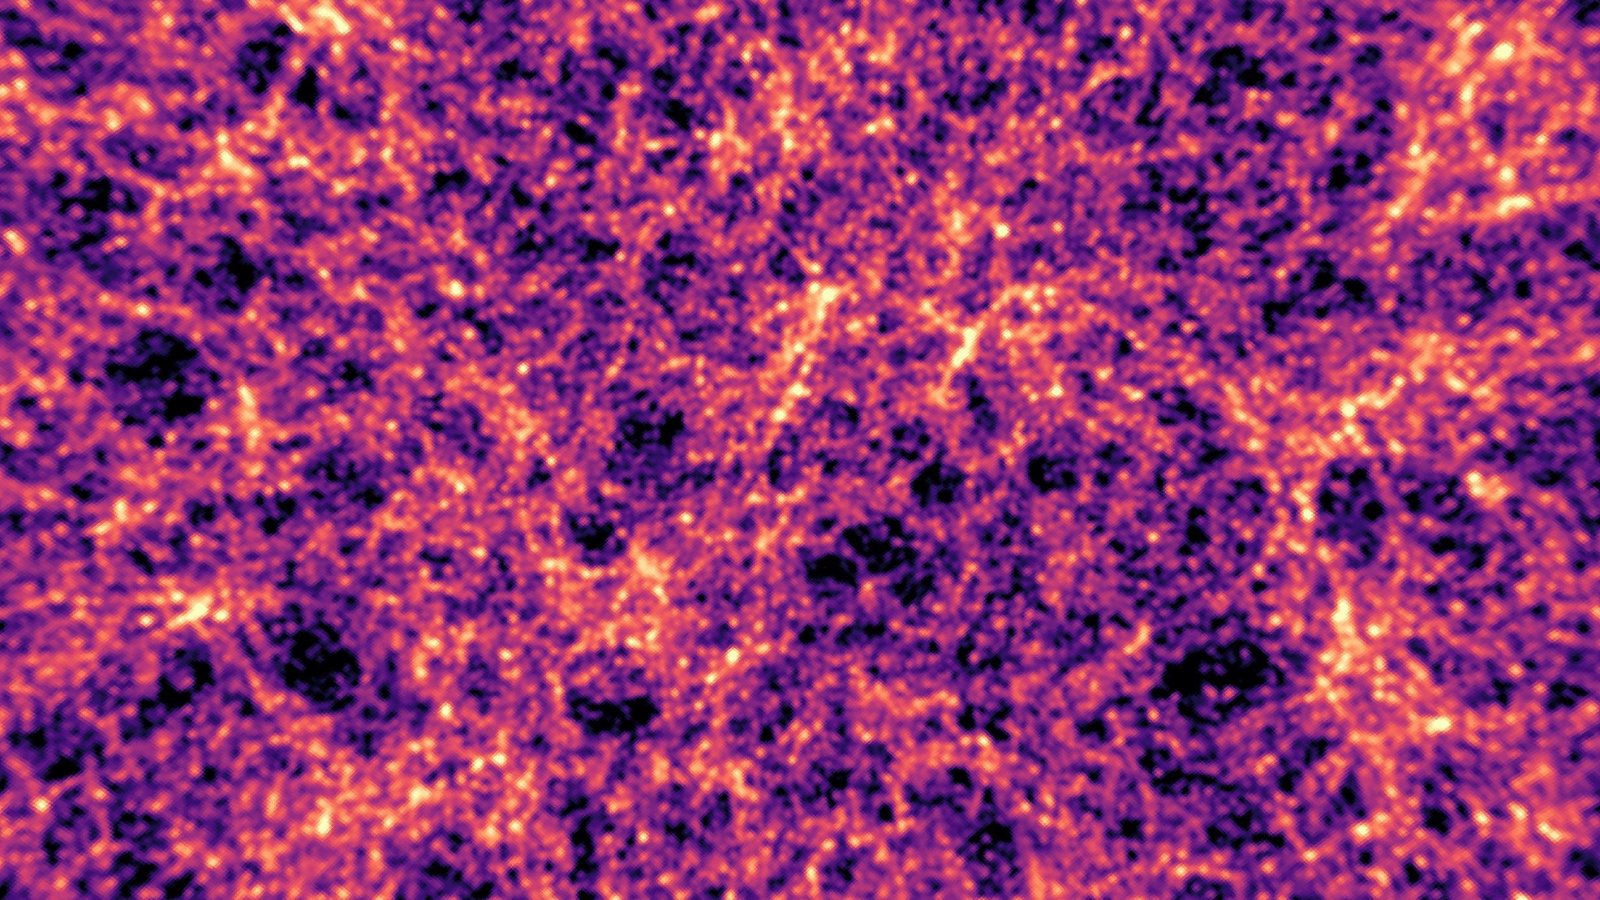 Dark energy remains a mystery. Maybe AI can help crack the code Space